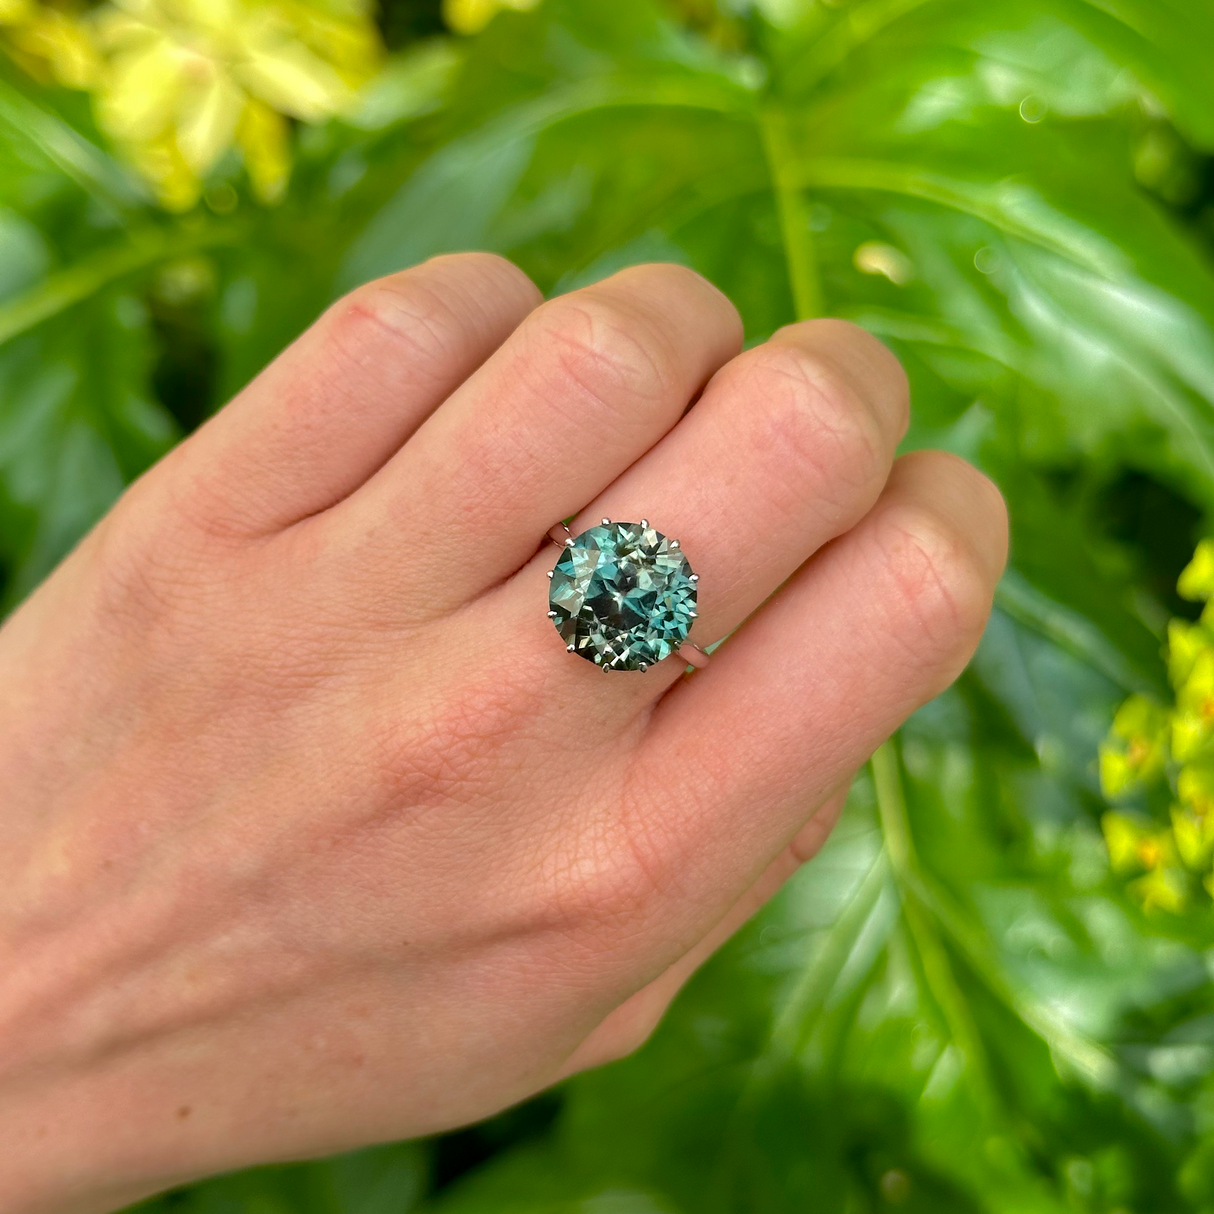 Vintage, Blue Zircon and Diamond Cocktail Ring, 18ct White Gold worn on hand.